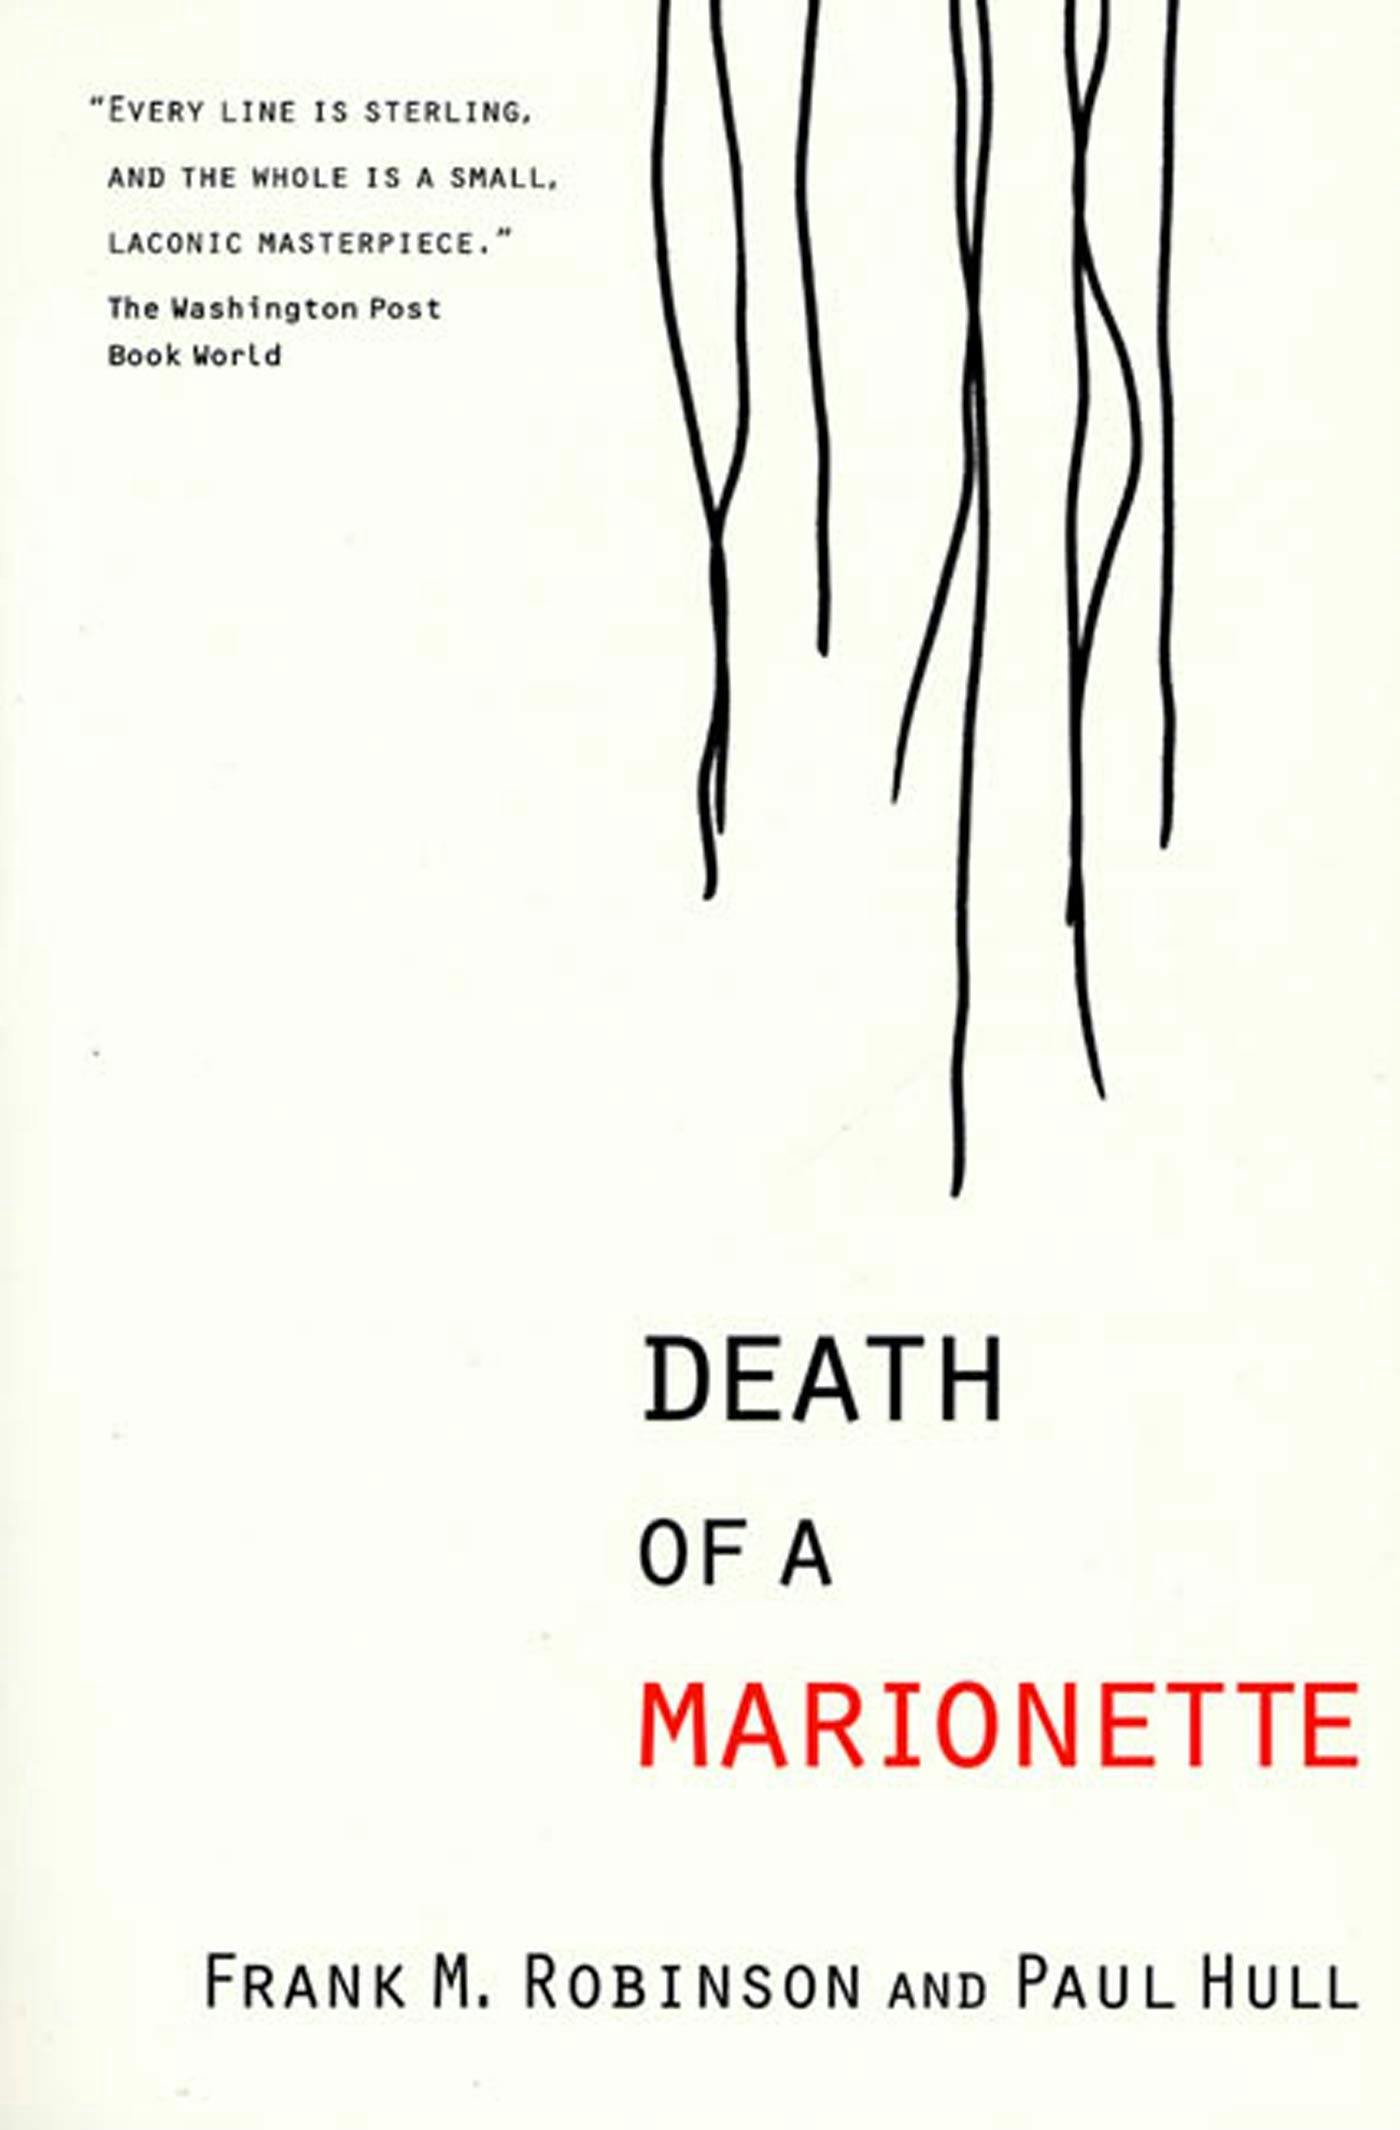 Cover for the book titled as: Death of a Marionette